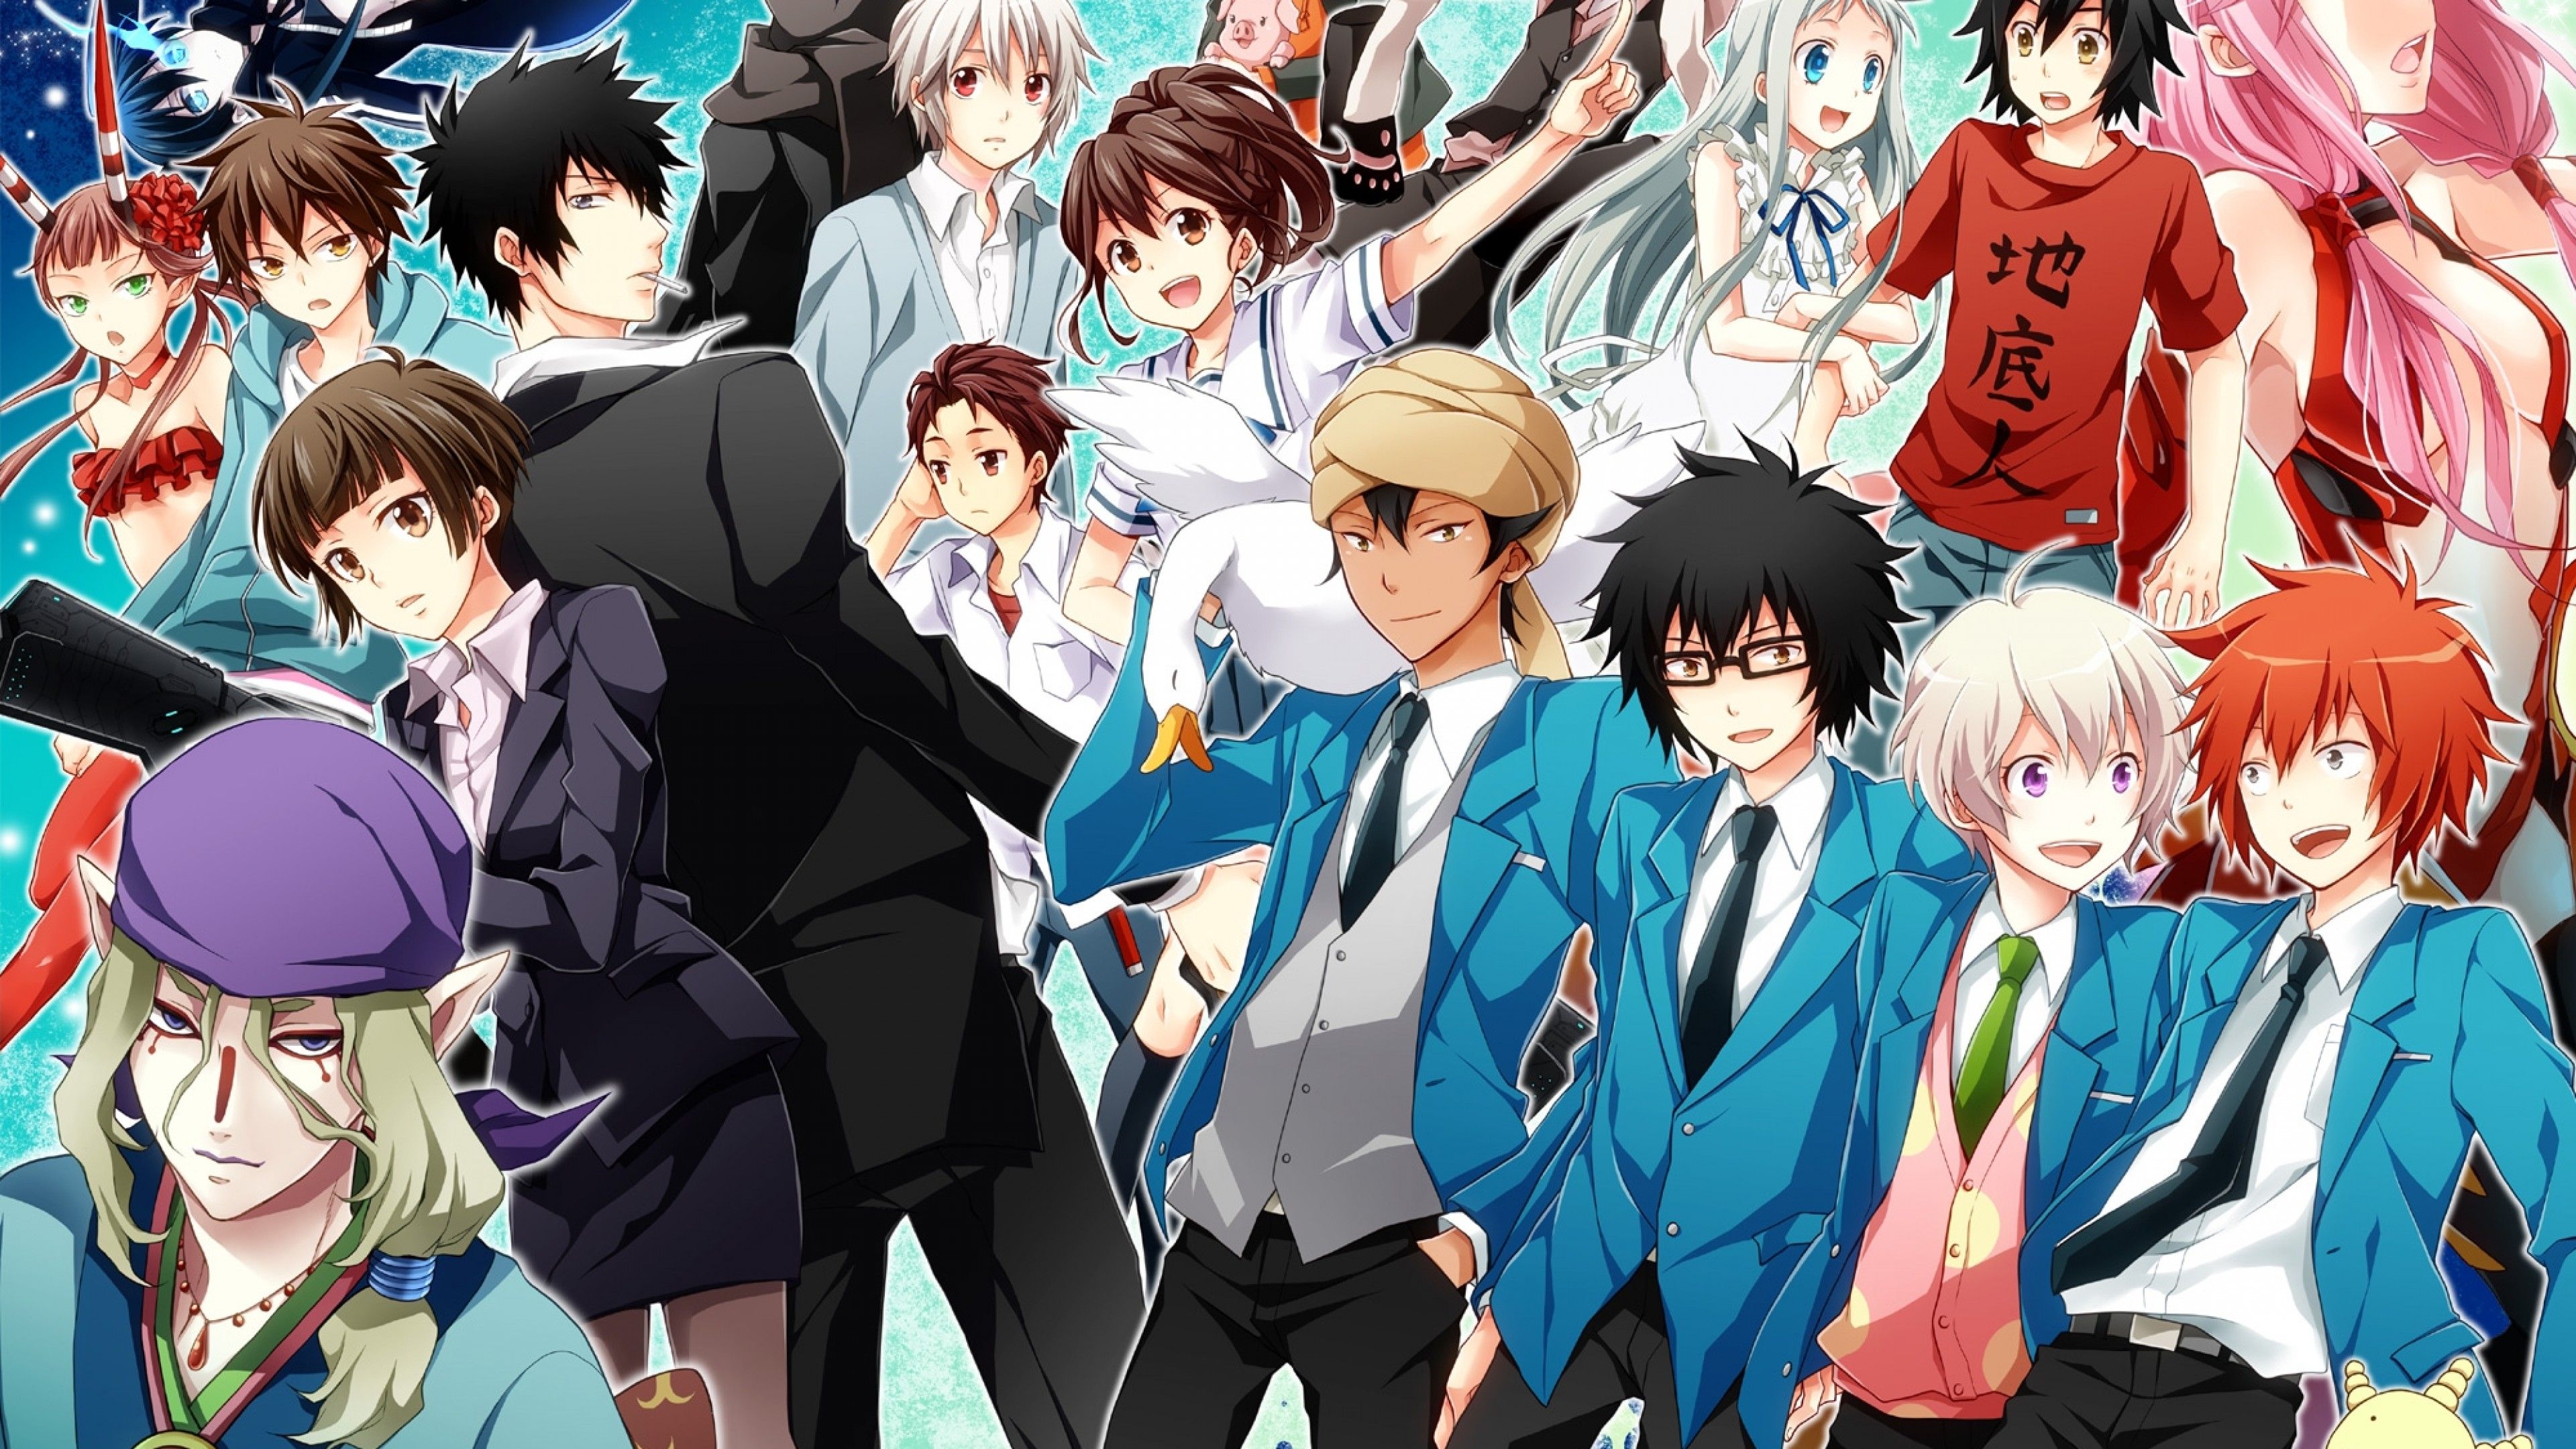 Download 3840x2160 Anime Crossover, Guilty Crown, Psycho Pass